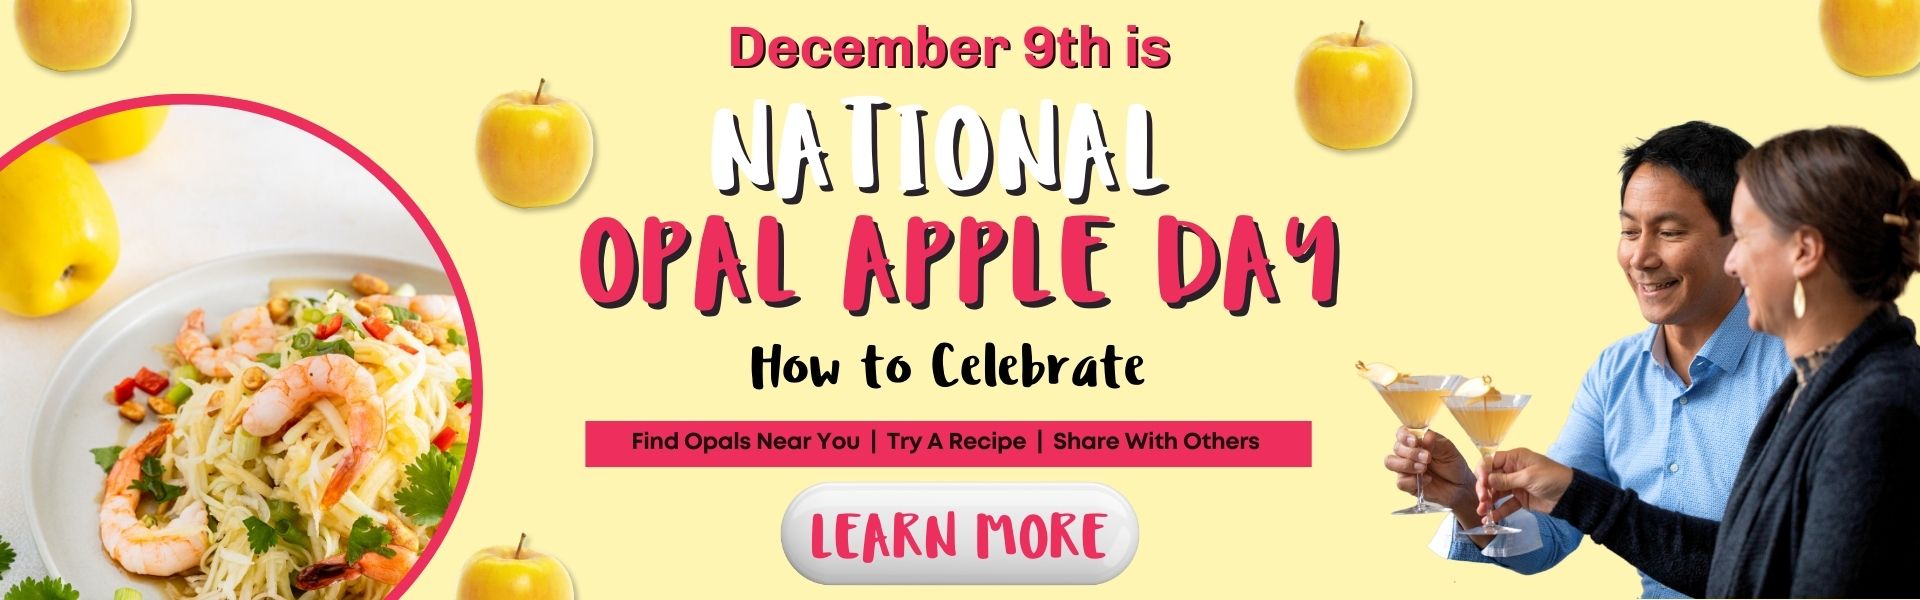 National Apple Day with Opal Apples